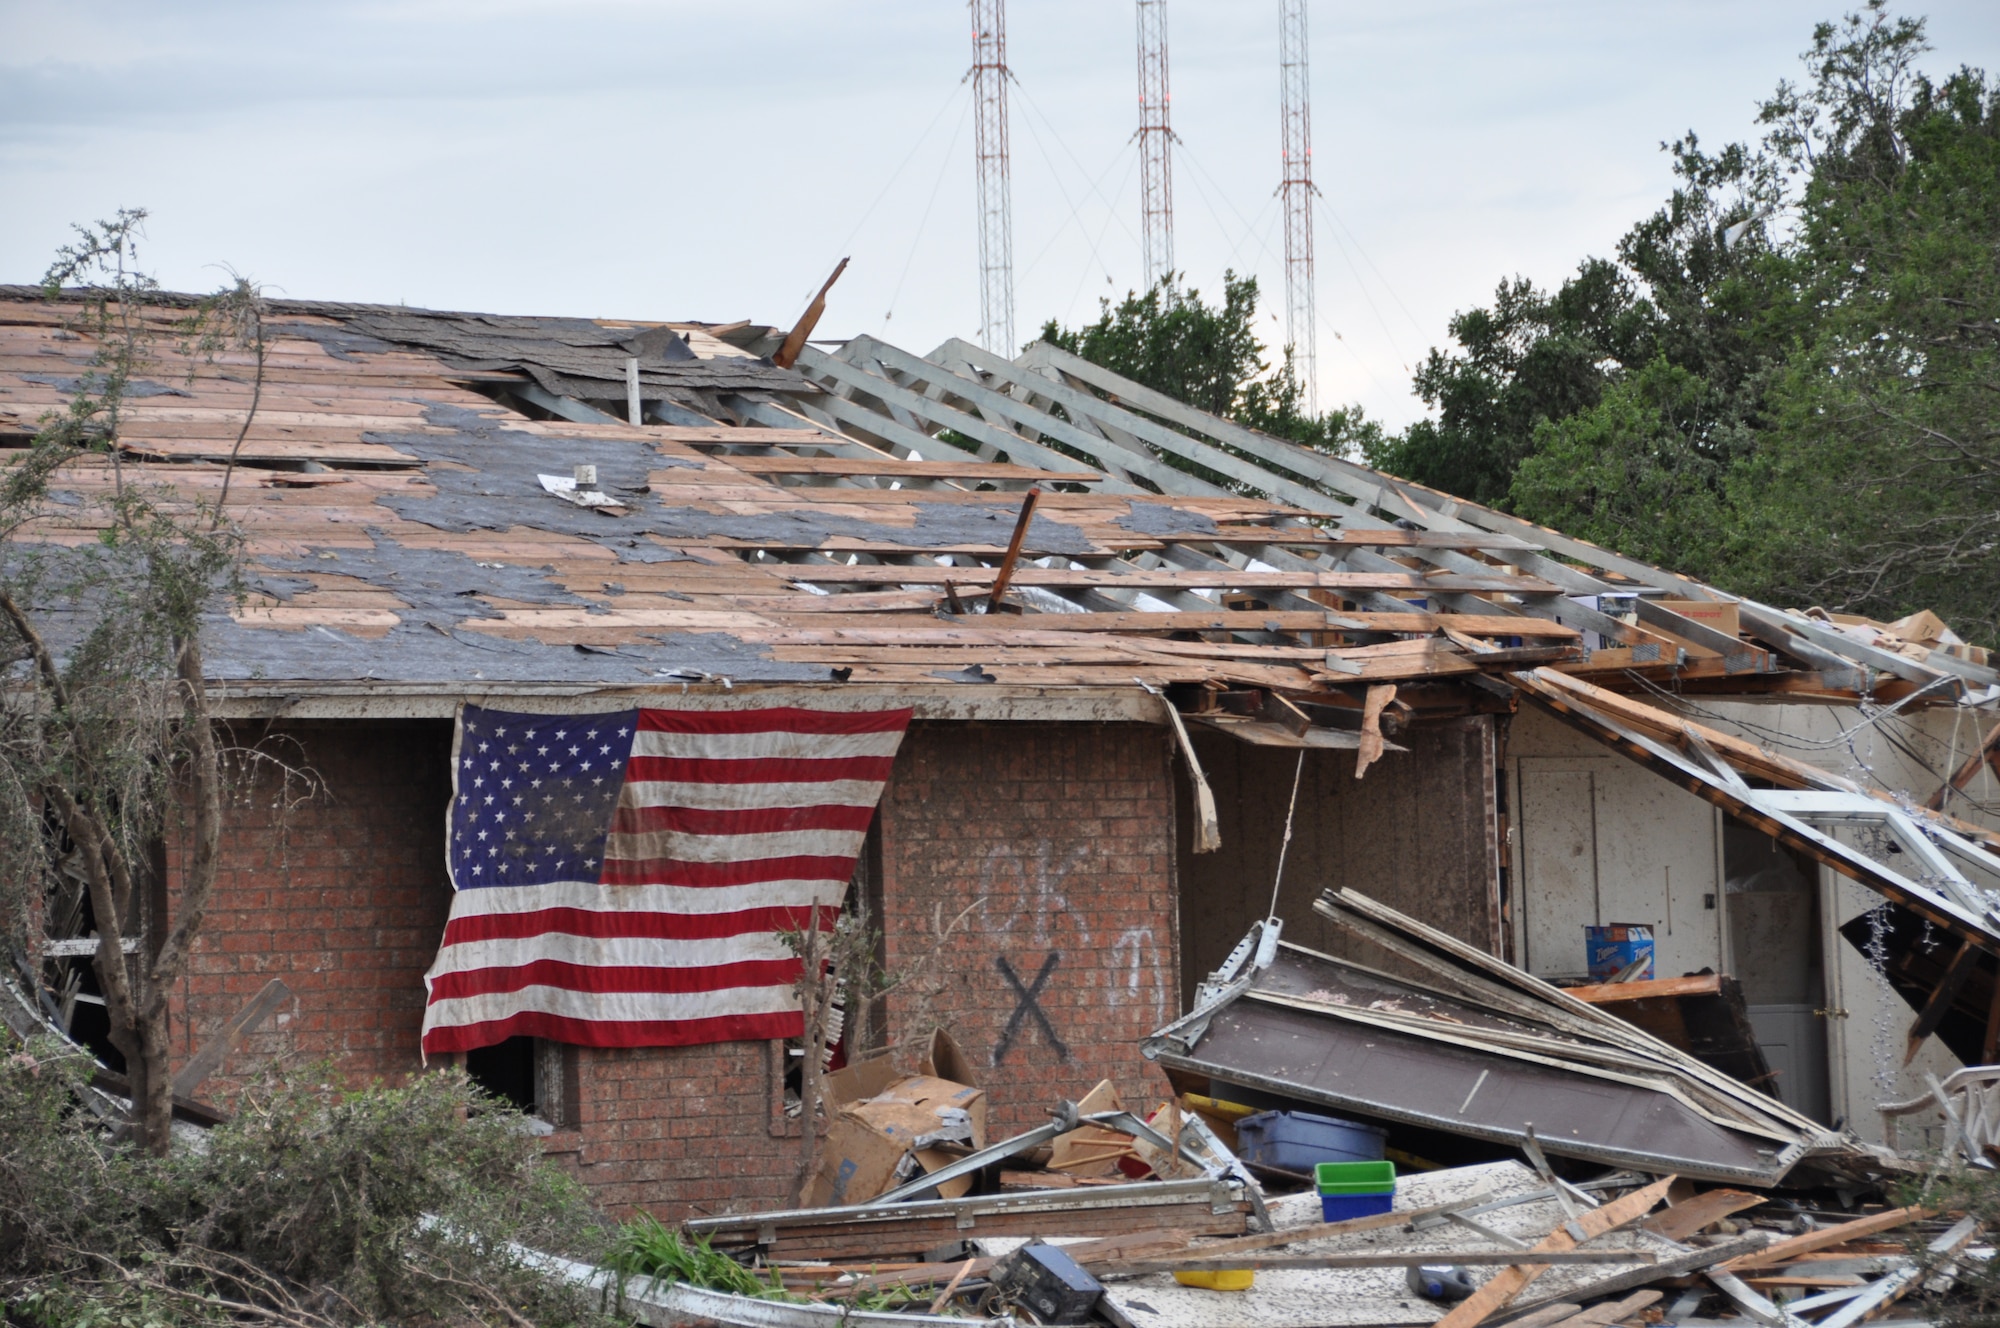 A United States flag hangs from a home devastated by a tornado that hit the town of Moore; Okla. May 20; 2013 near Tinker Air Force Base. (U.S. Air Force photo by Maj. Jon Quinlan)